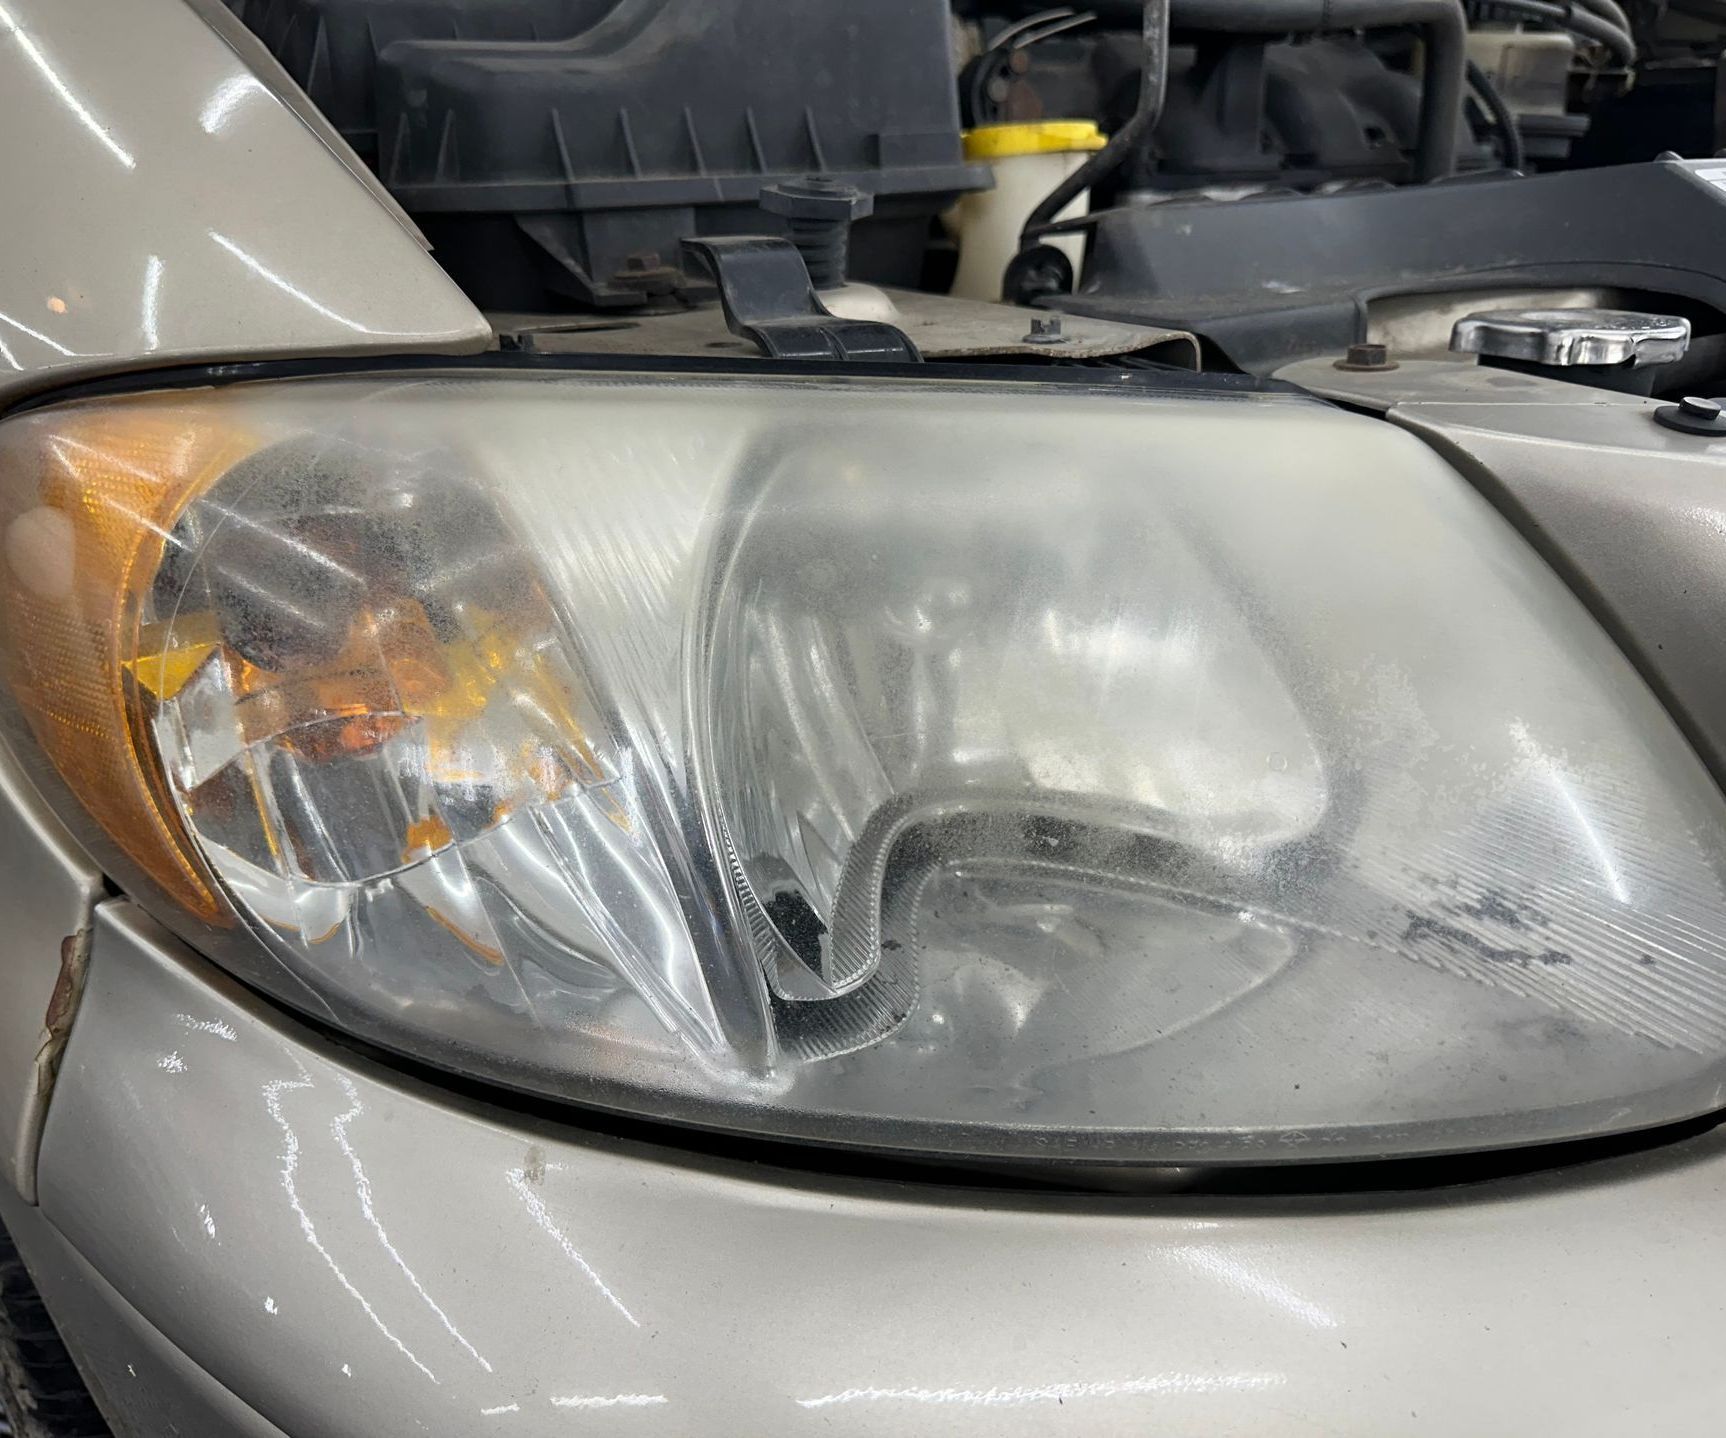 A close up of a car 's headlight with the hood open.